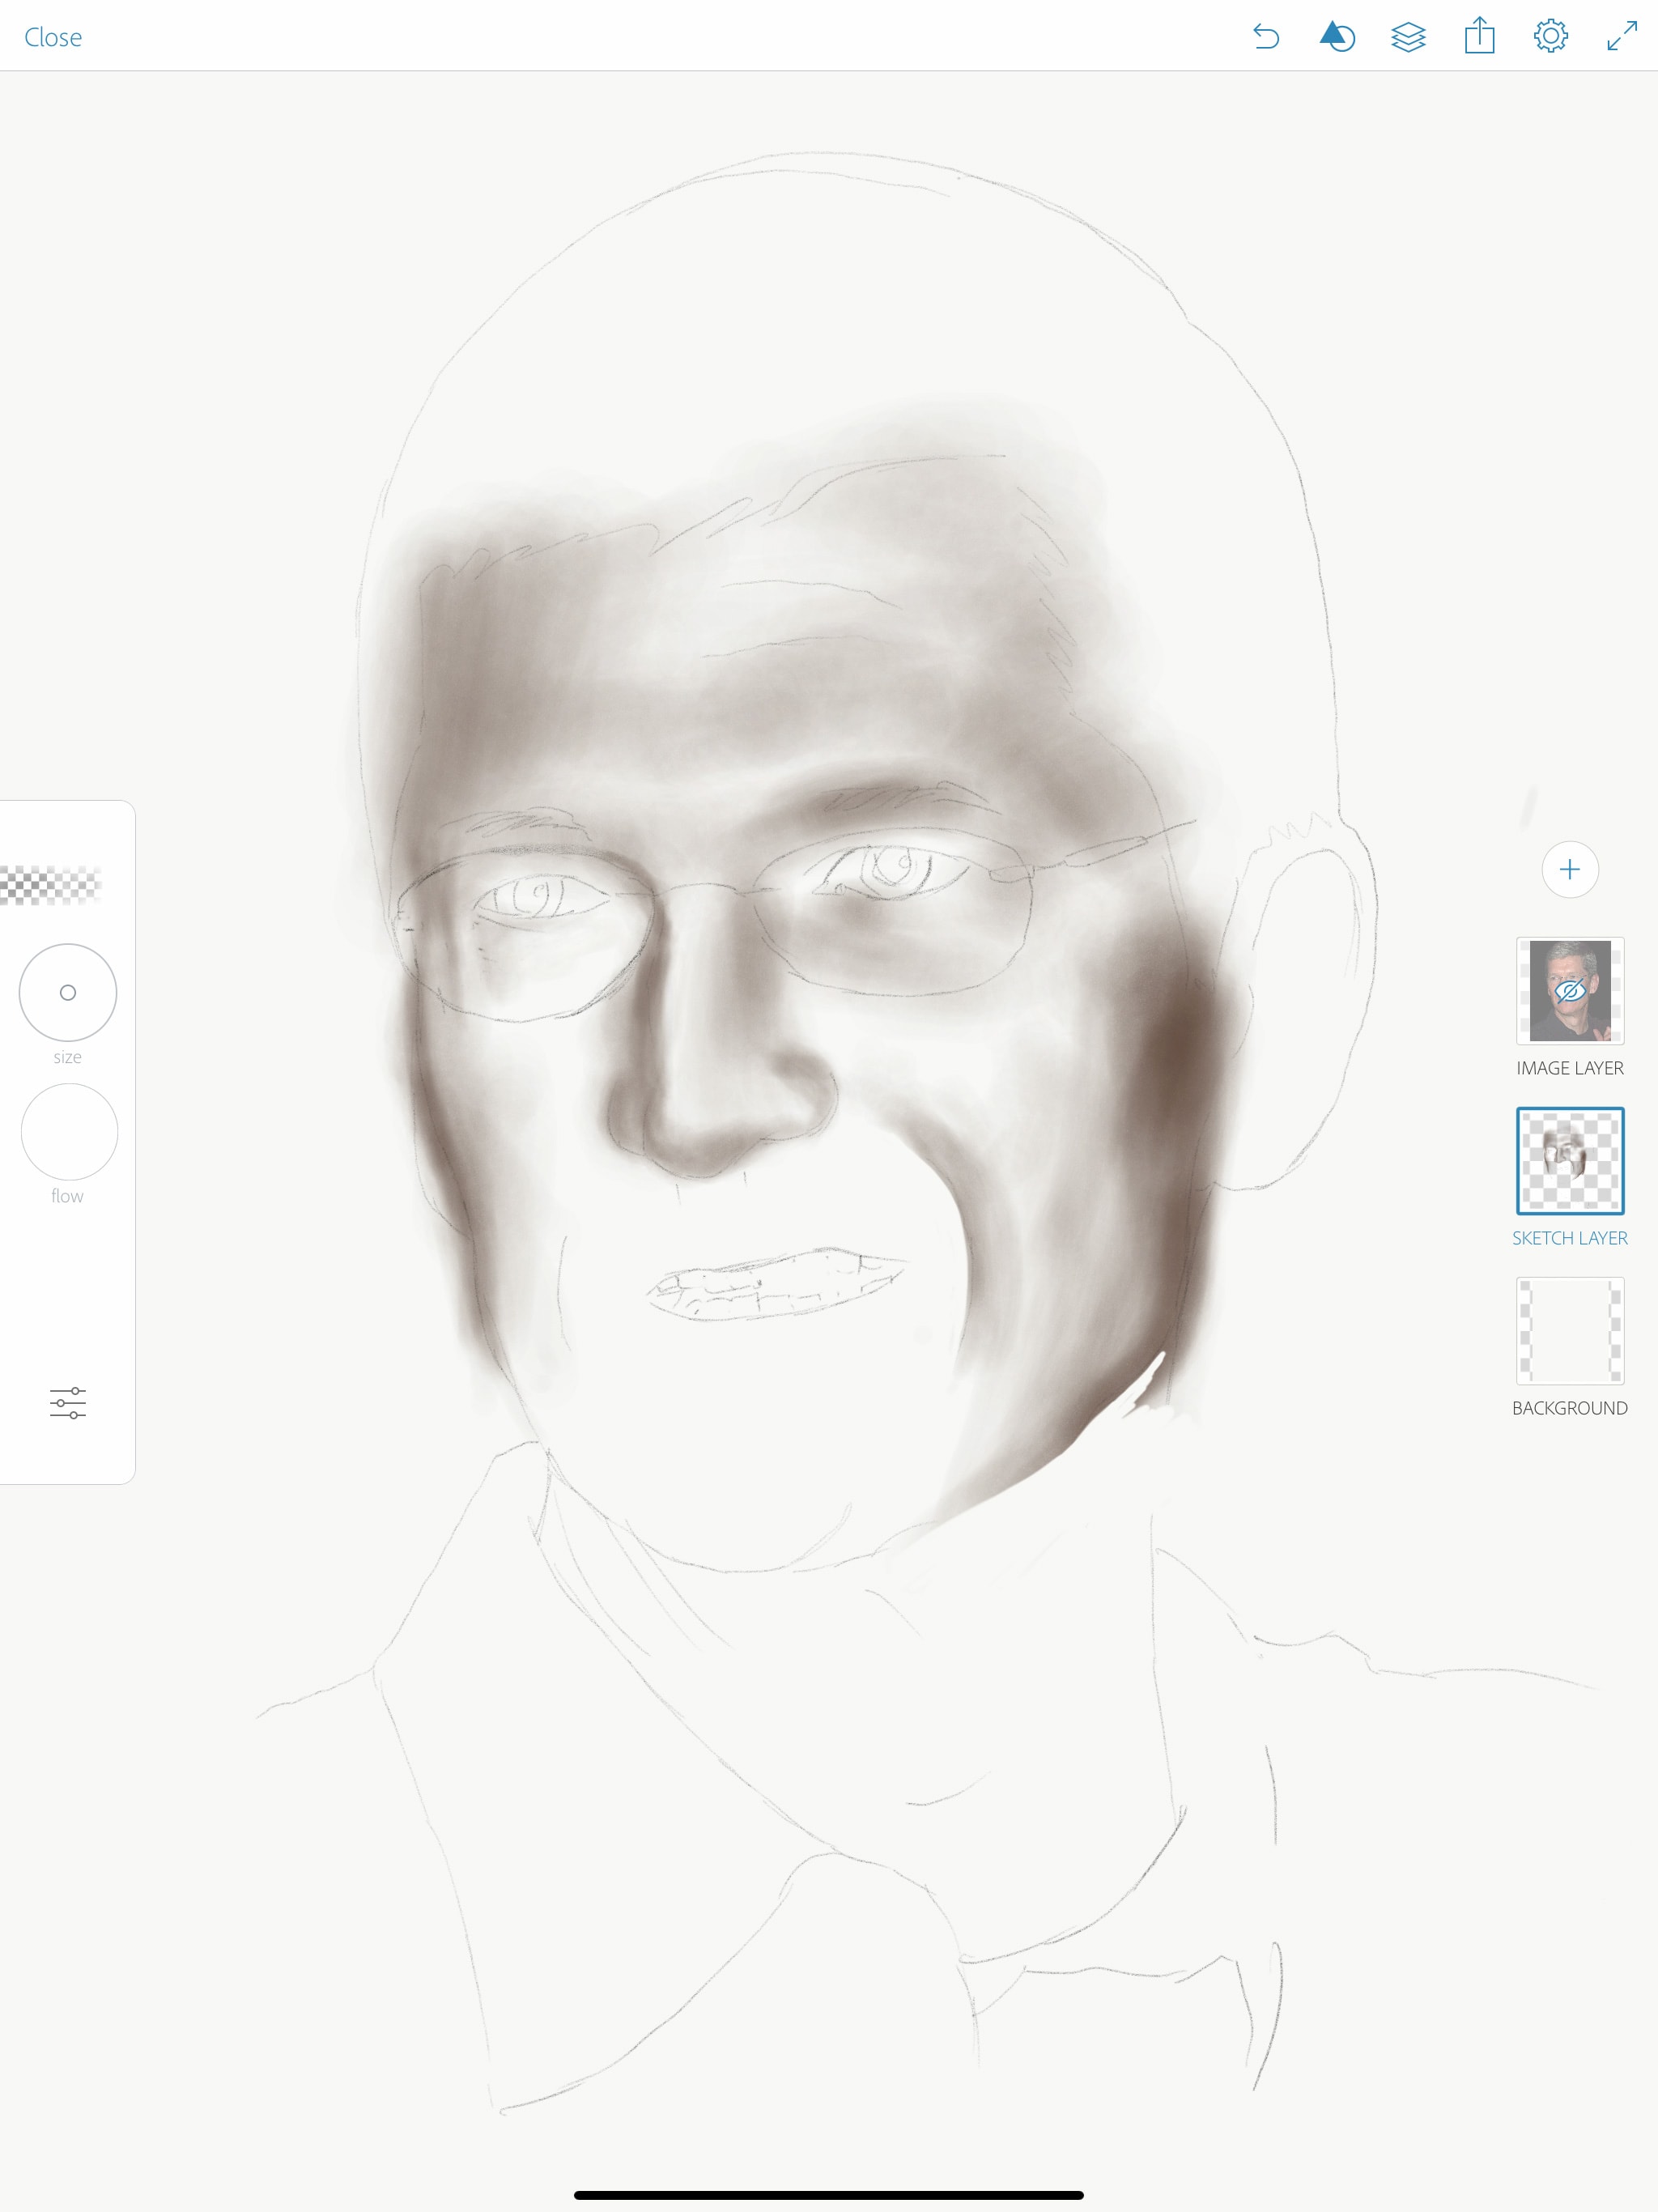 Apple Pencil portrait drawing: Step 2: Add shadow and highlight